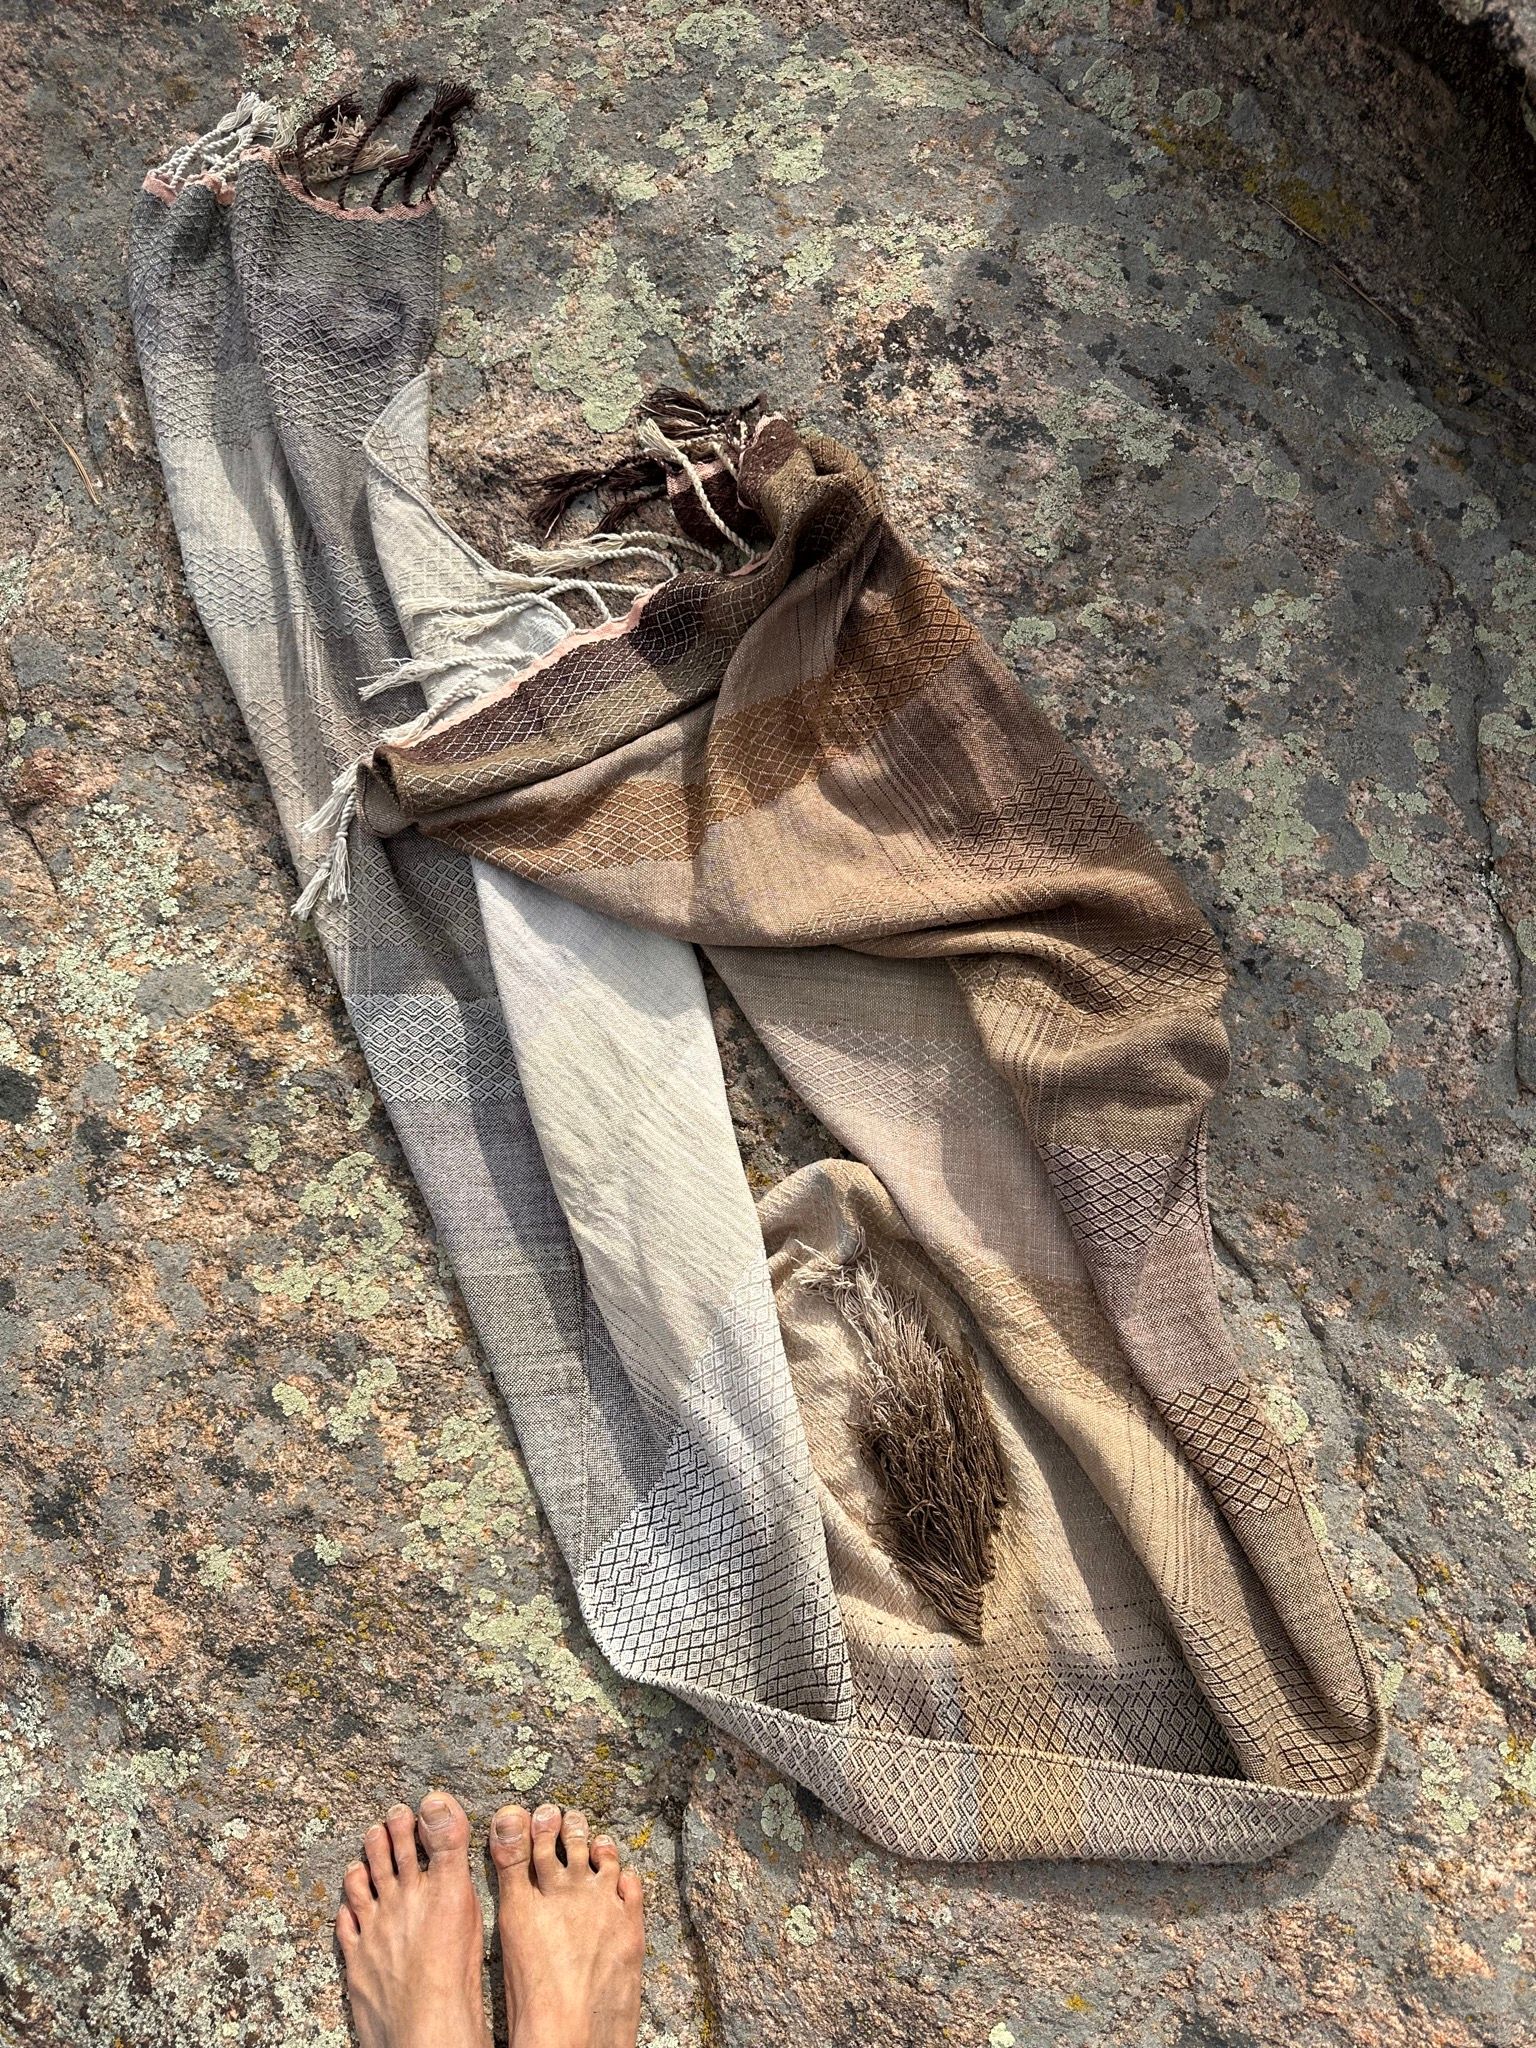 A detail of handwoven softly graded grey to white to brown diamond pattern raw silk fabric laying on a rock with barefeet in the foreground